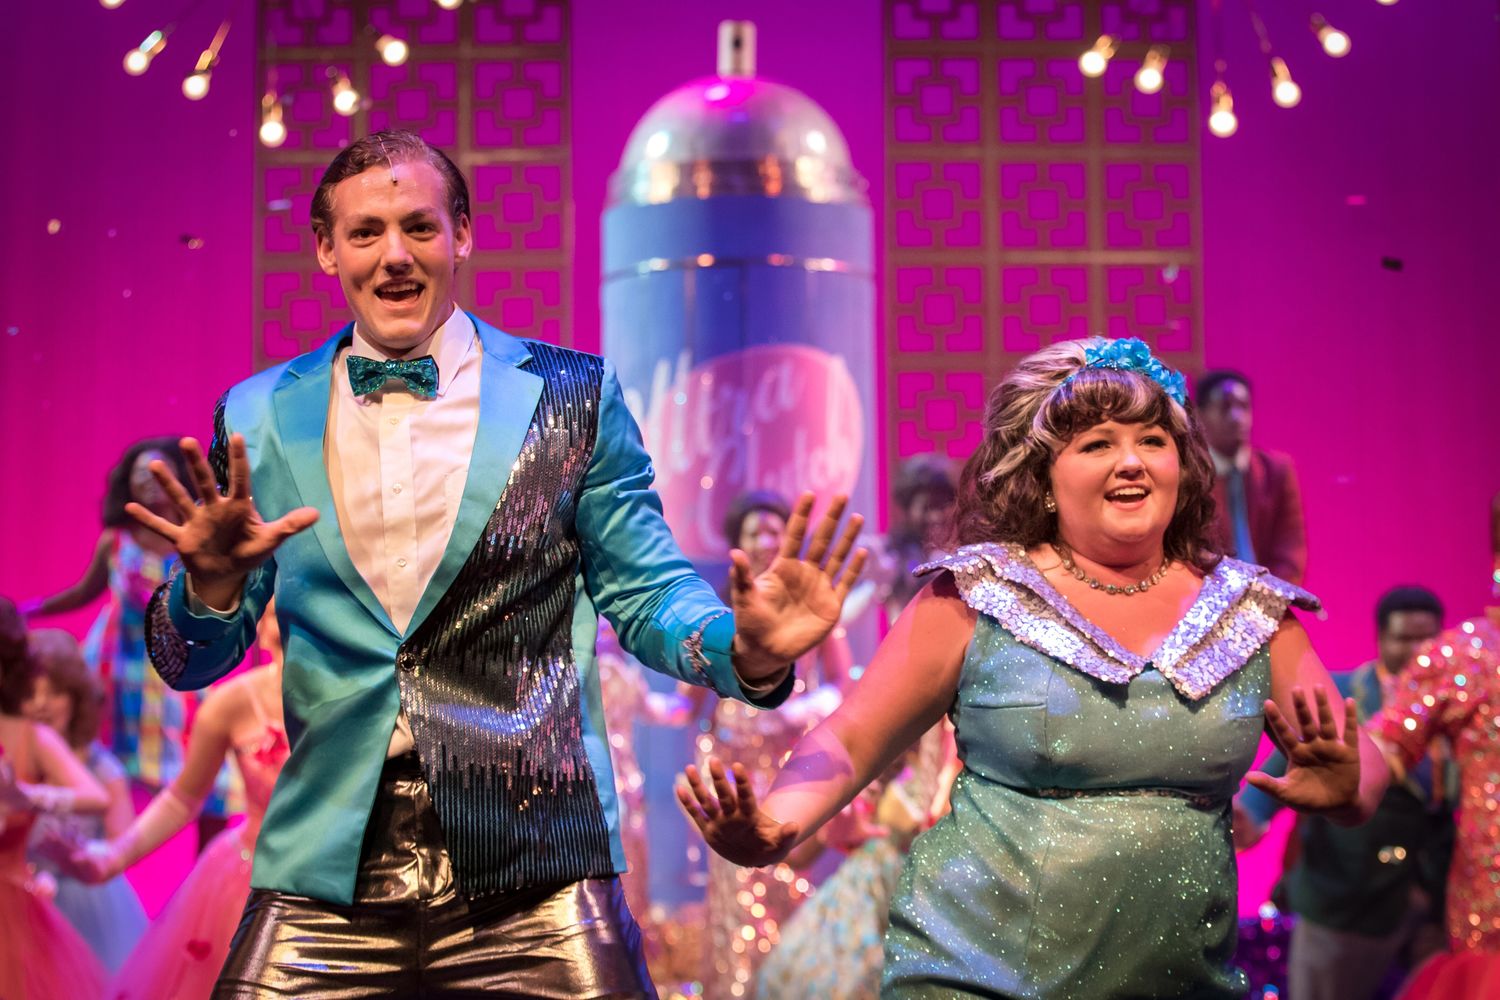 Timothy Marsh (l) as Link Larson and Erica Peninger portrays Stacy Turnblad, the ever-positive voice for social change and dancing her way into popularity, in the Theatre Memphis musical production of Hairspray in the Lohrey Theatre, June 7 ? 30, 2019.